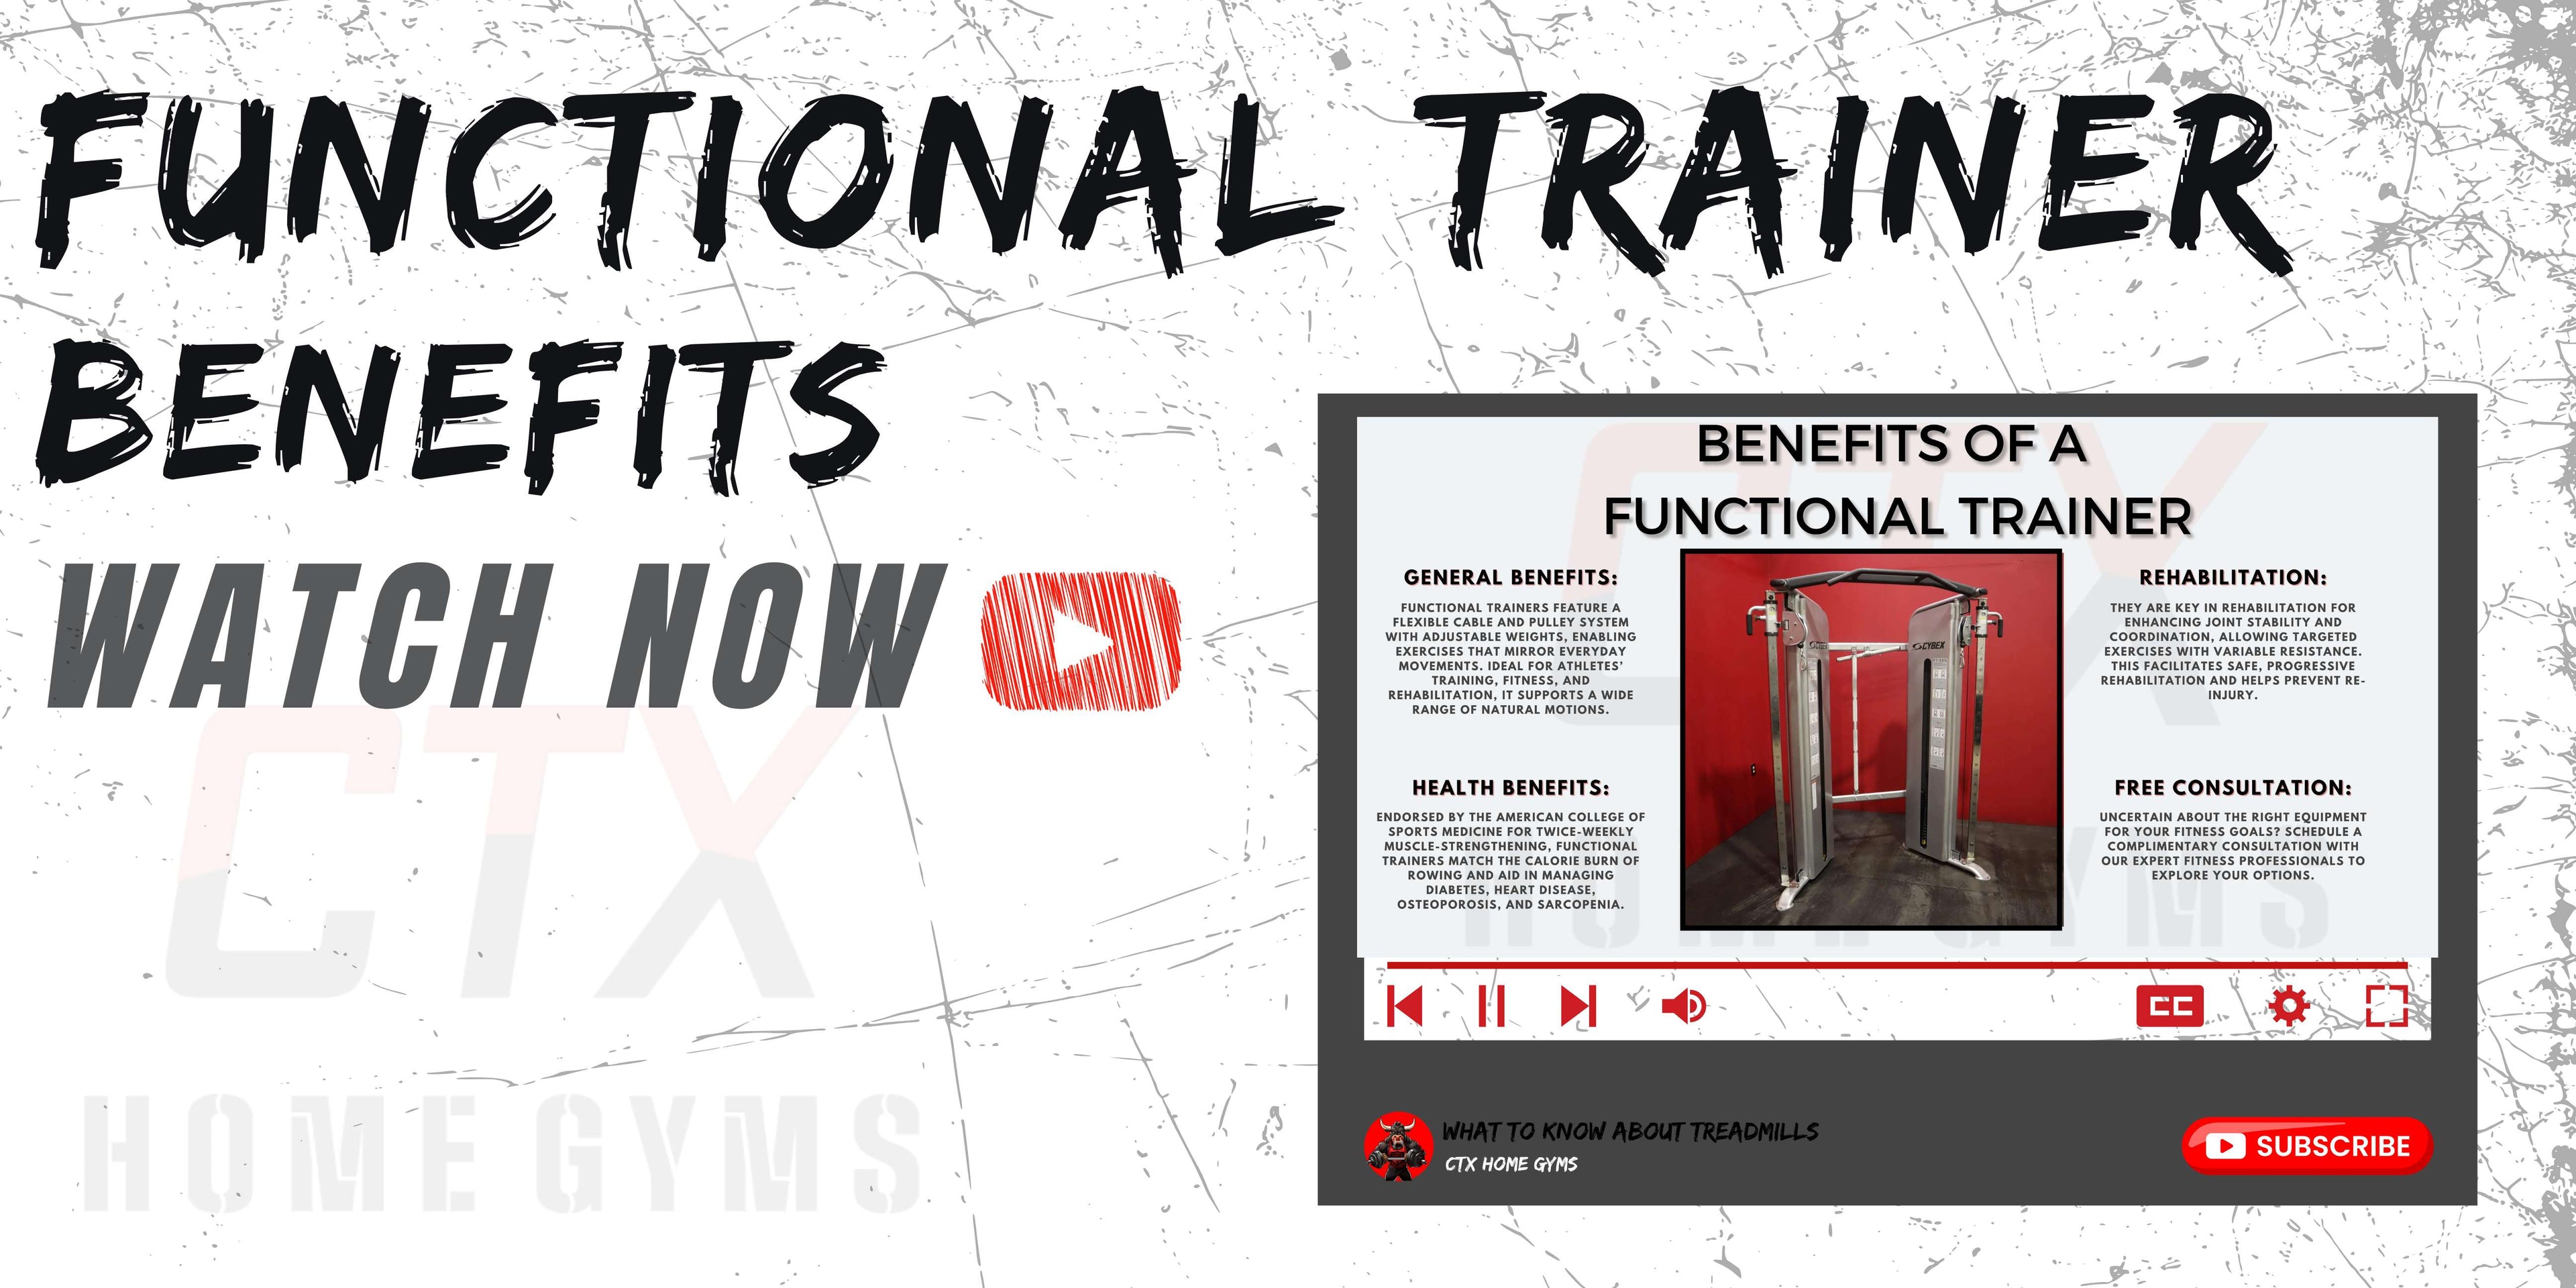 Load video: What to know about functional trainers